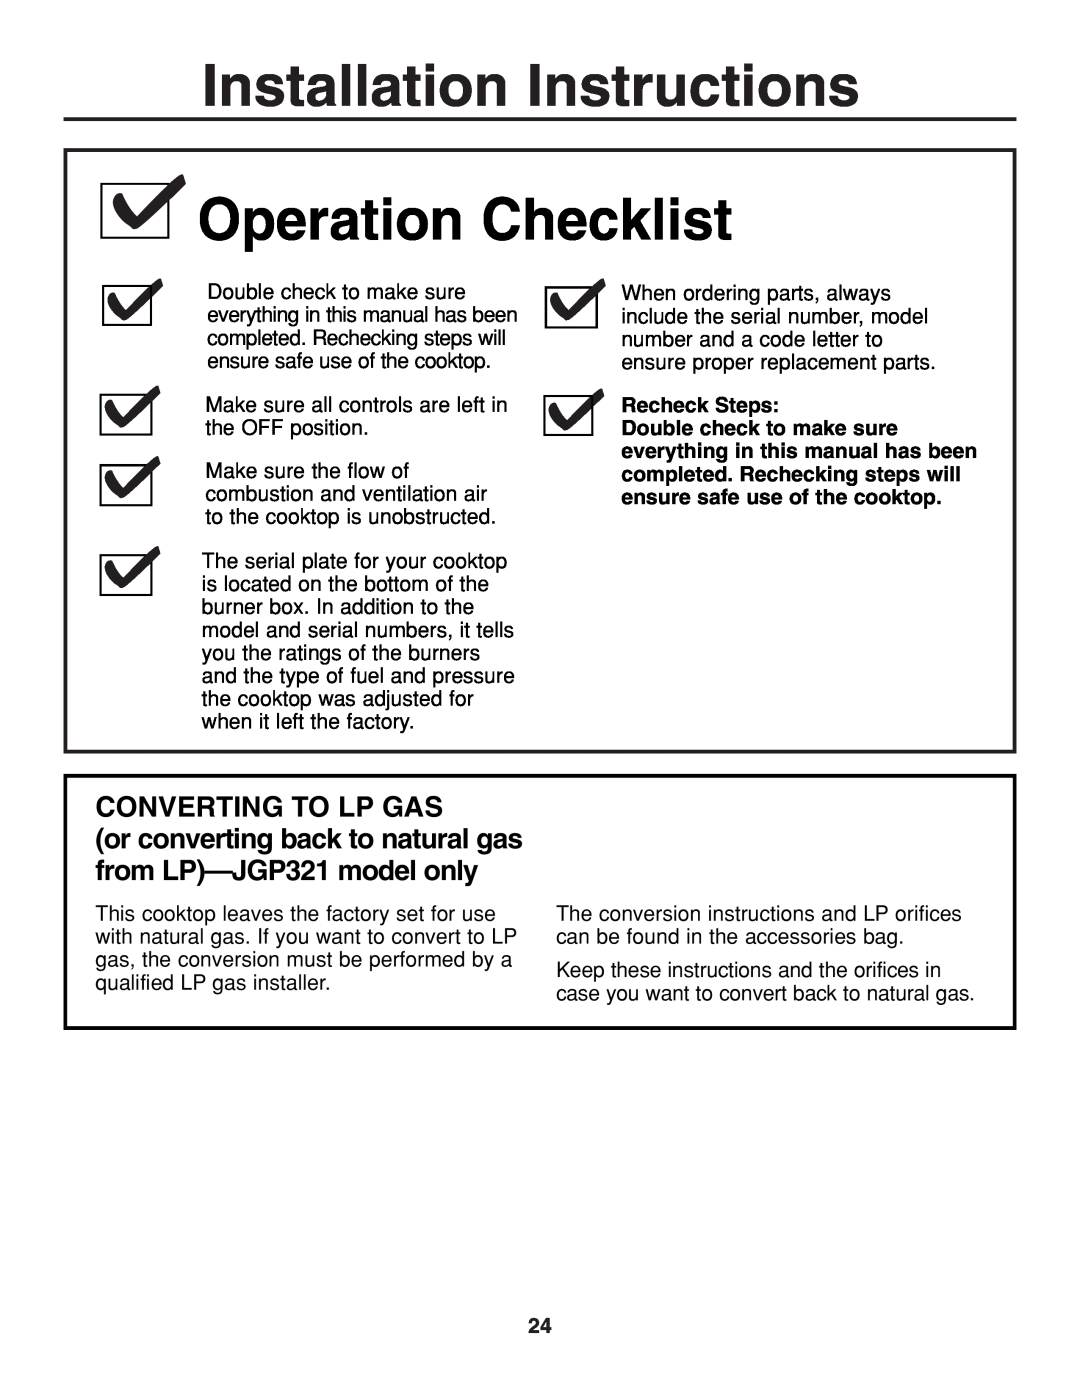 GE JGP319, JGP321 owner manual Installation Instructions Operation Checklist, Converting To Lp Gas 